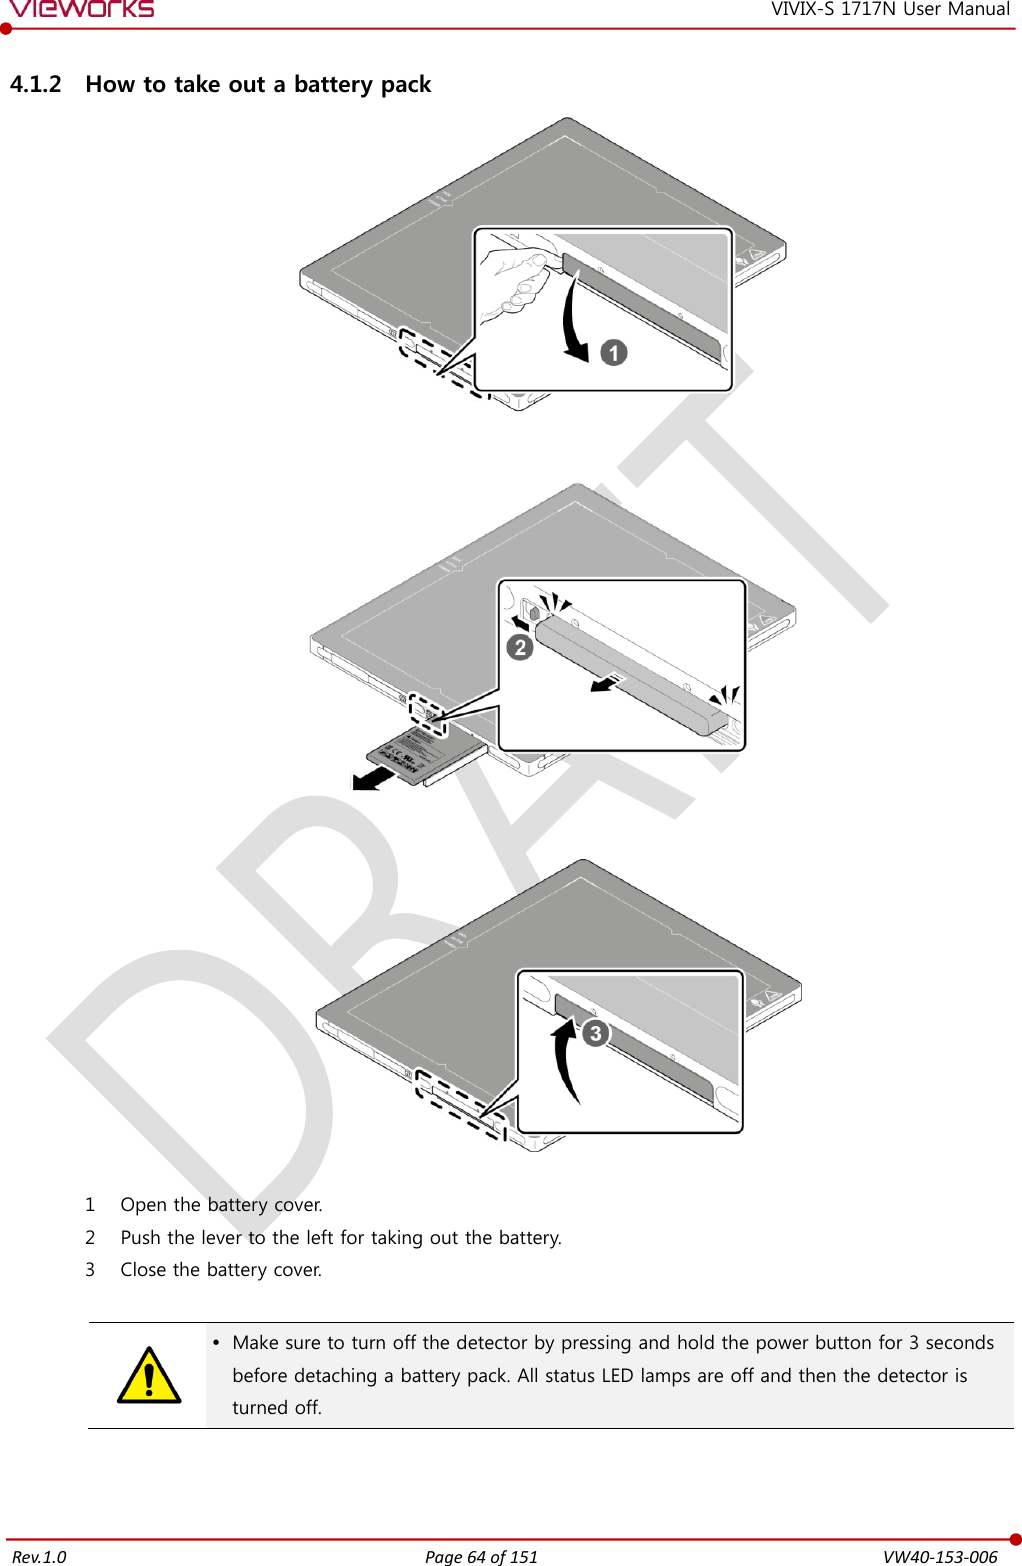   Rev.1.0 Page 64 of 151  VW40-153-006 VIVIX-S 1717N User Manual 4.1.2 How to take out a battery pack   1 Open the battery cover. 2 Push the lever to the left for taking out the battery. 3 Close the battery cover.    Make sure to turn off the detector by pressing and hold the power button for 3 seconds before detaching a battery pack. All status LED lamps are off and then the detector is turned off.  